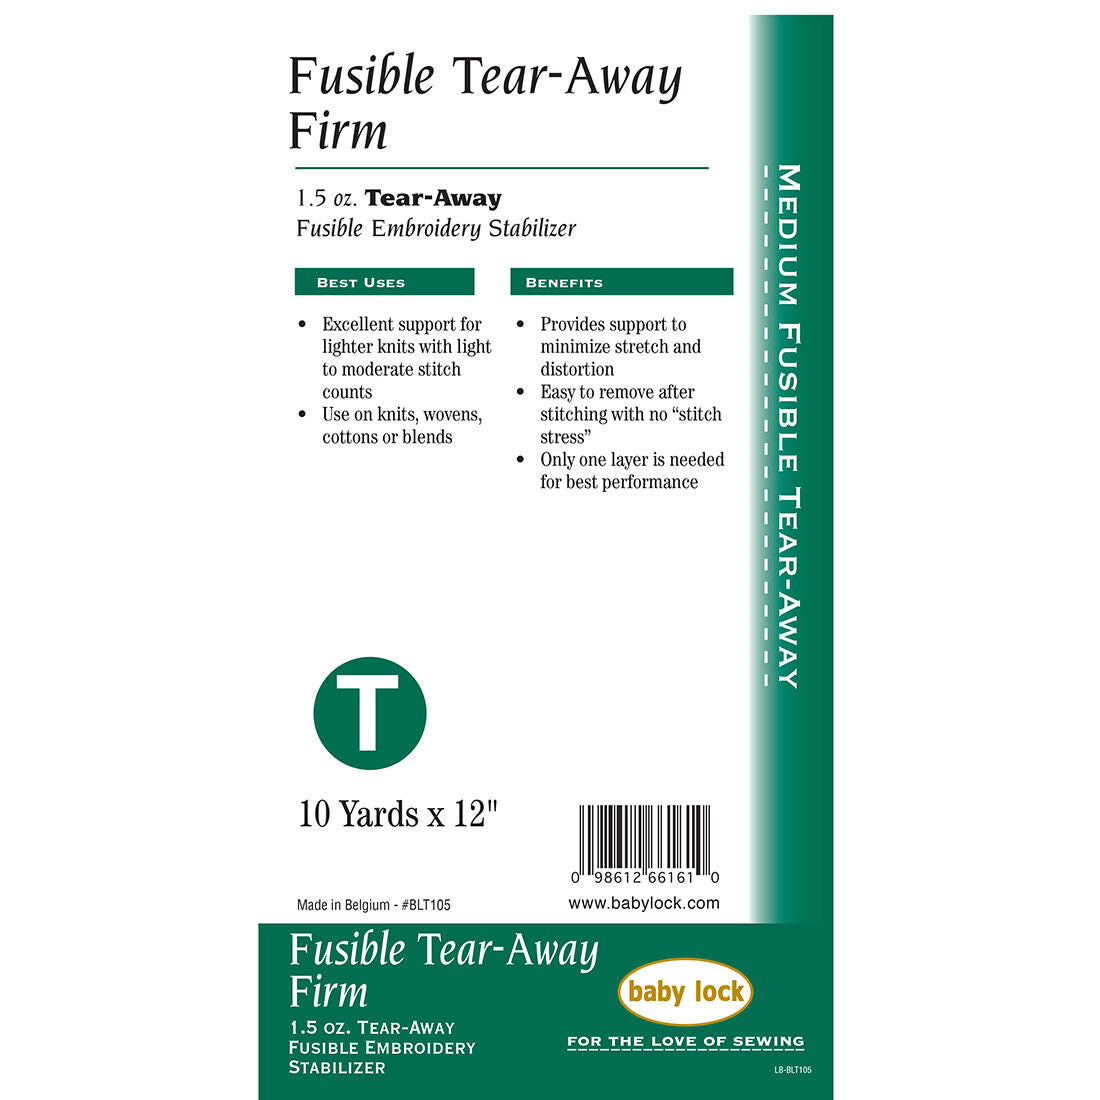 Baby Lock Fusible Tear-Away Firm Stabilizer